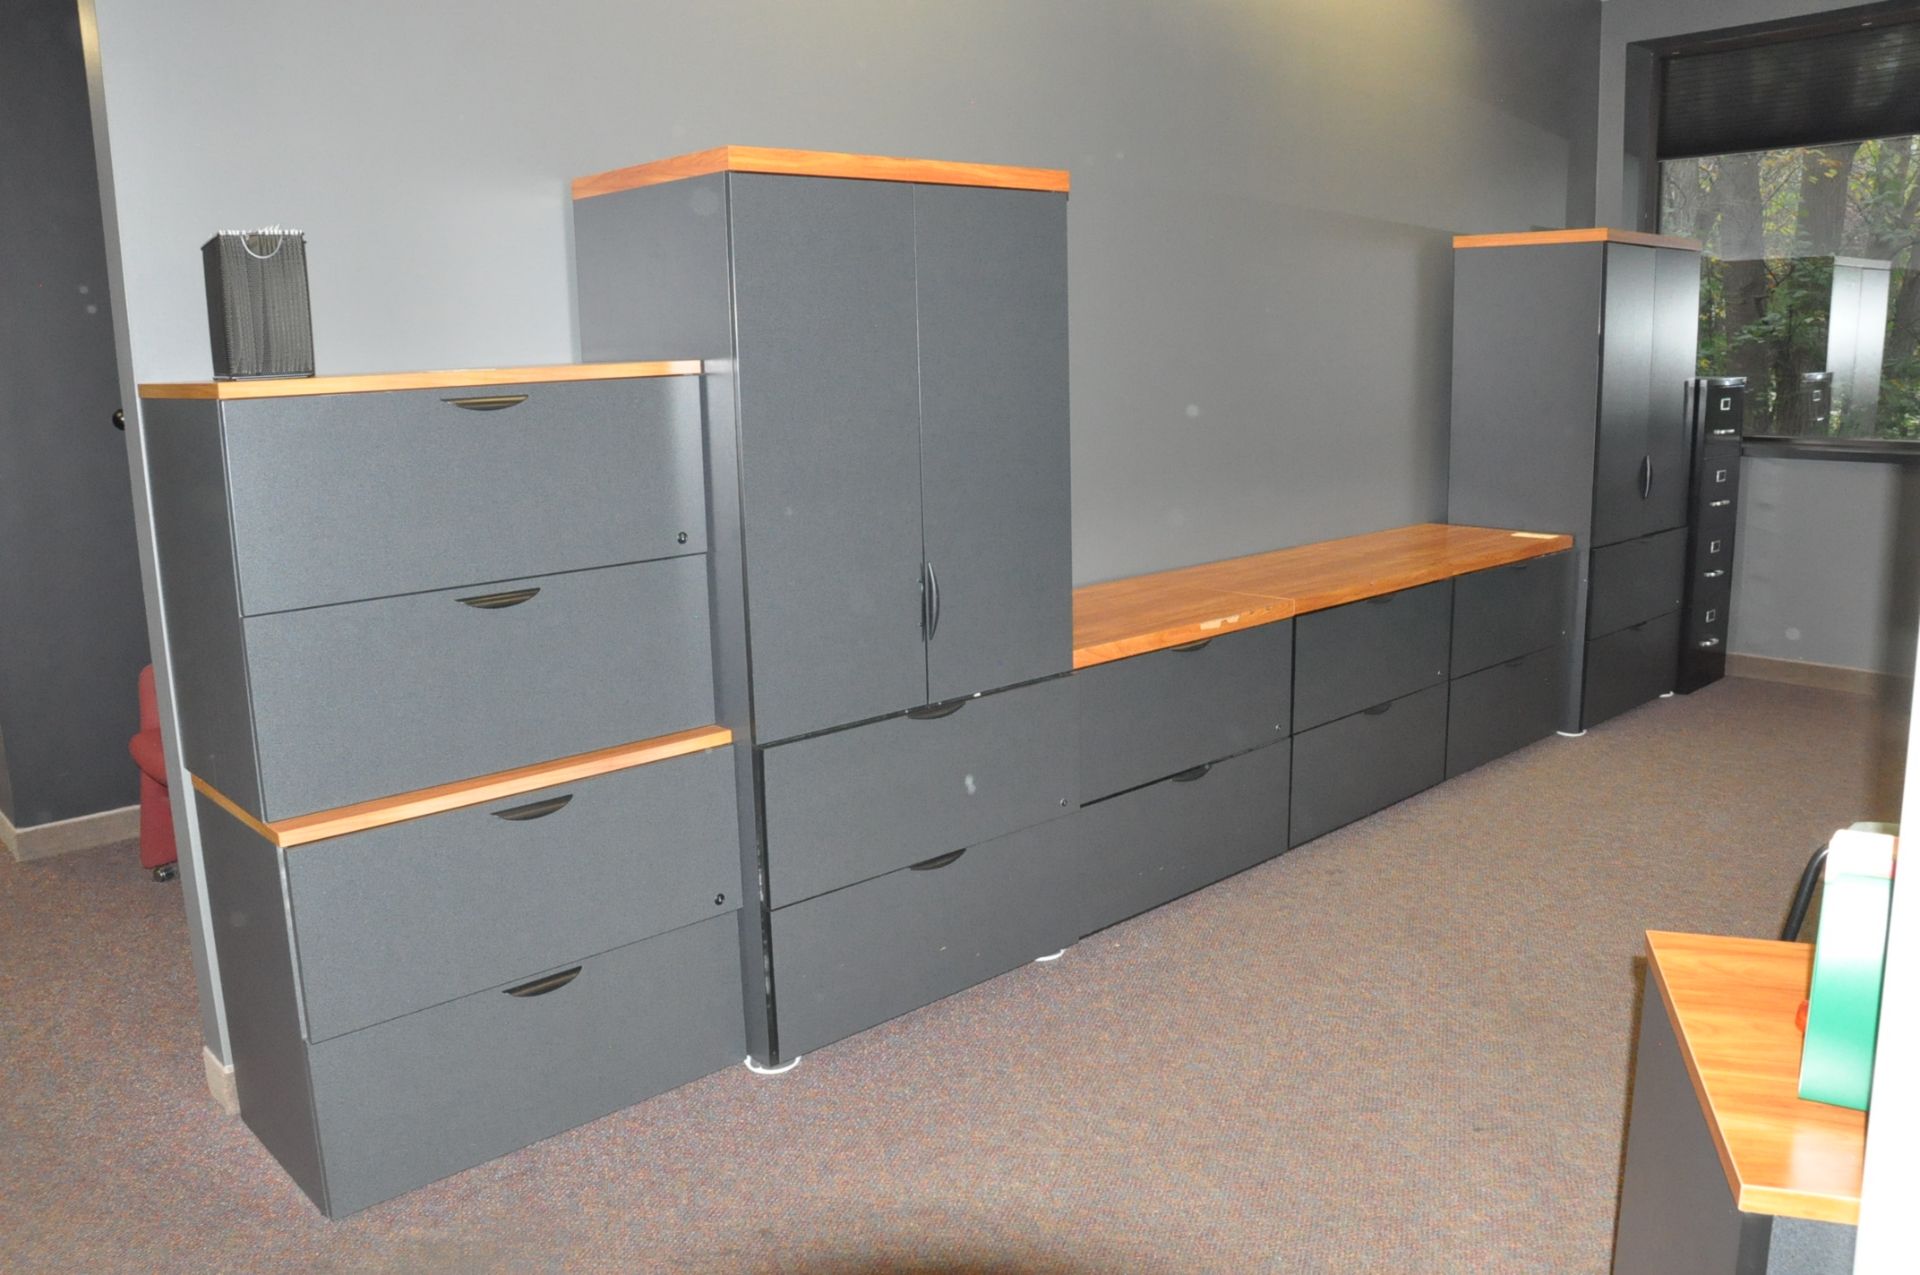 Lot-(7) Modular File Cabinets and (1) Vertical File Cabinet, (Contents Not Included), (Not to Be